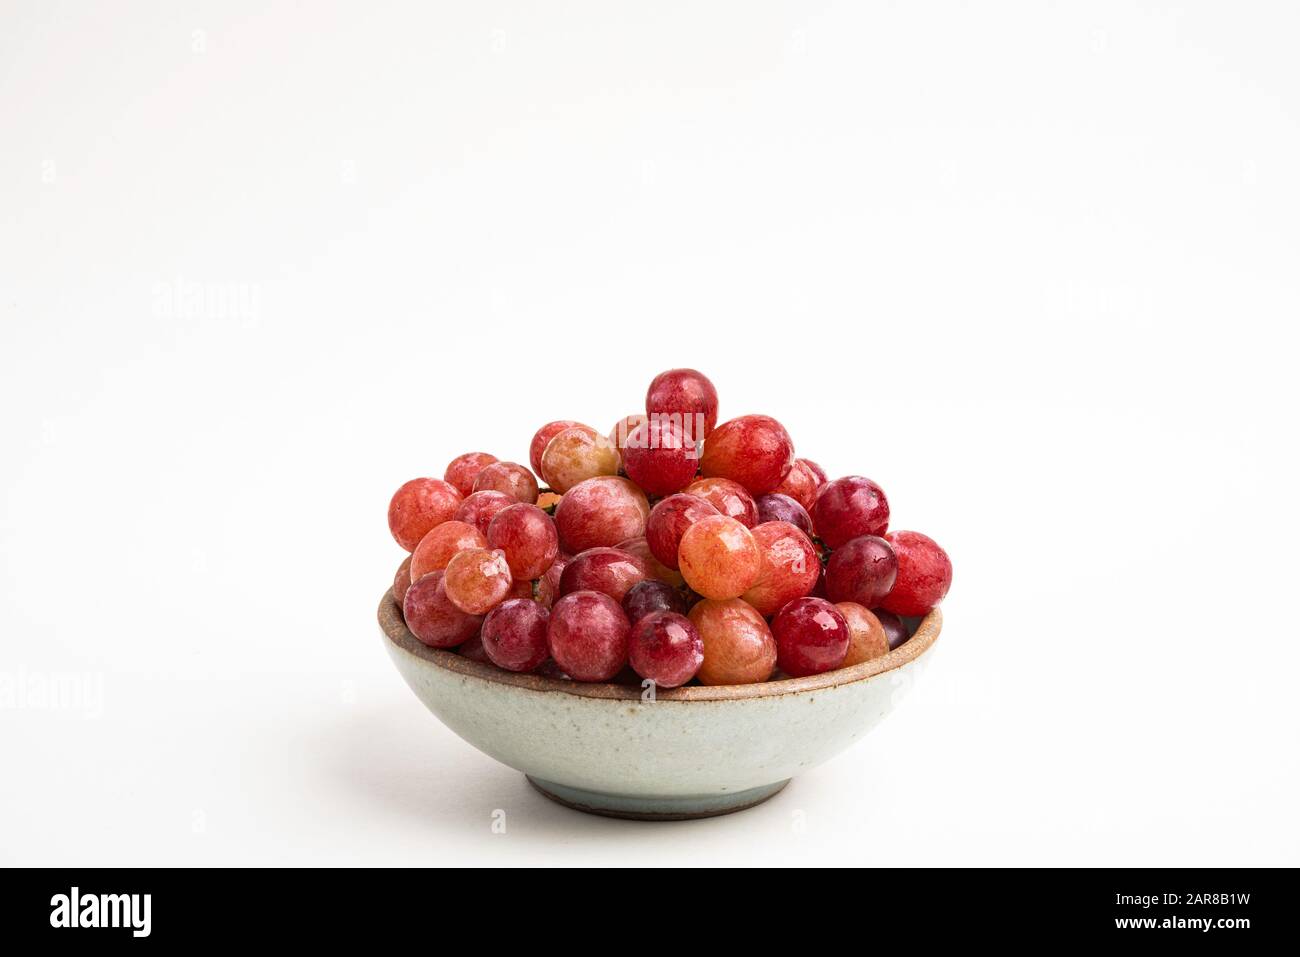 A bunch of fresh red grapes bunched on a small ceramic bowl set on a plain white background. Stock Photo